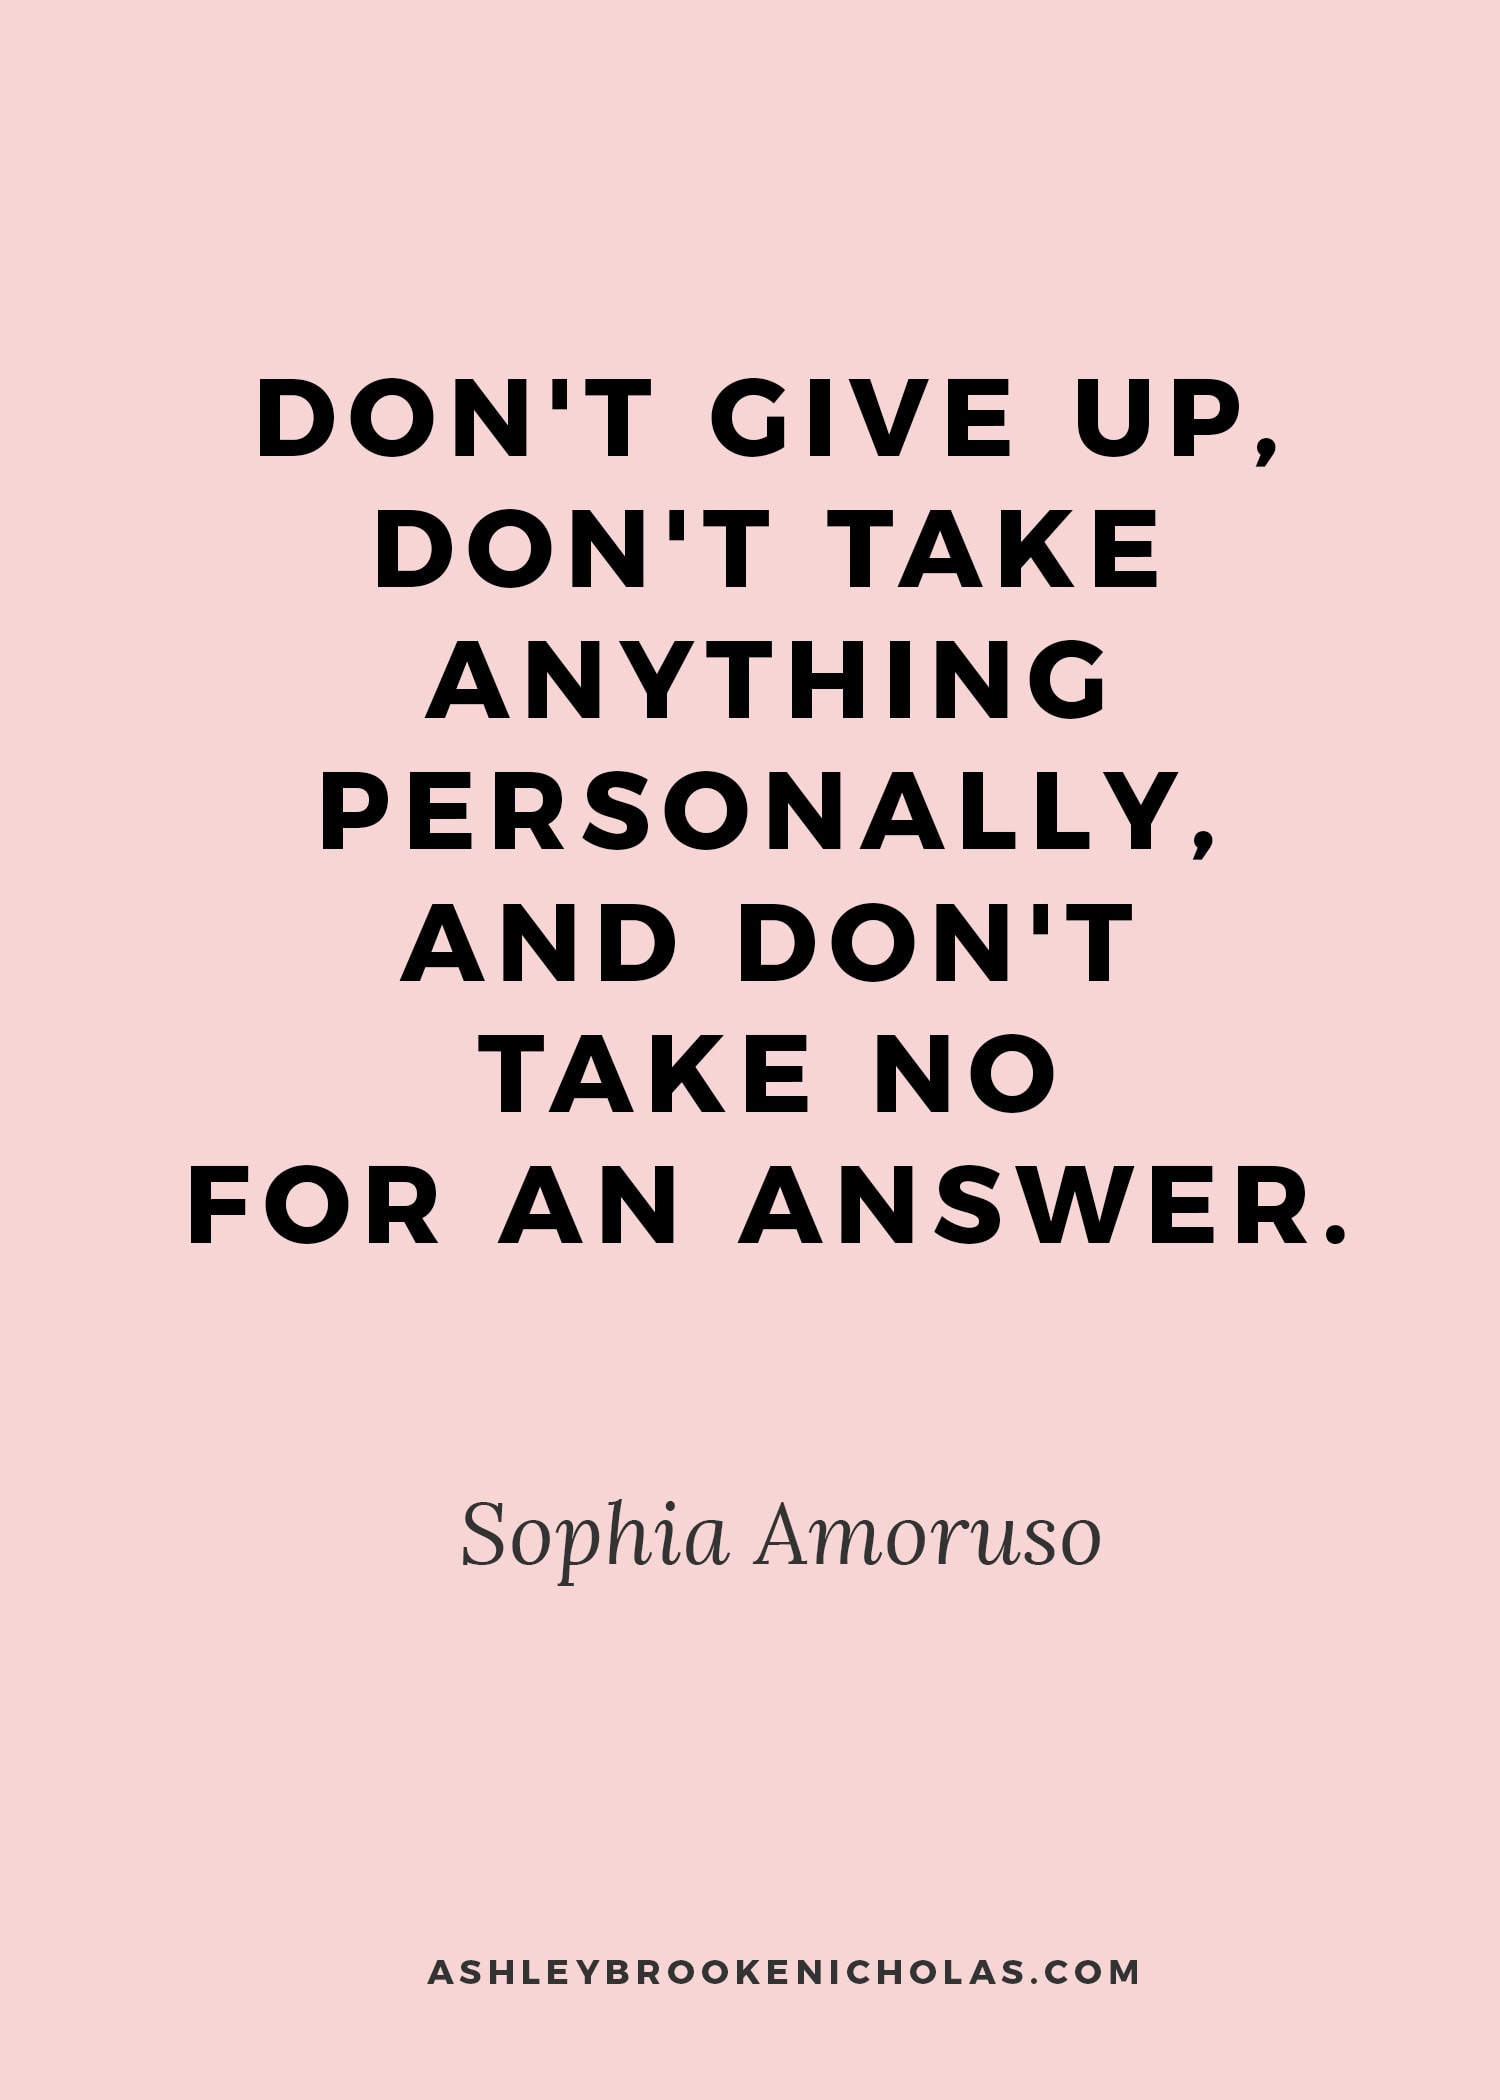 Inspirational Quotes For Boss
 10 Quotes for Every Girl Boss